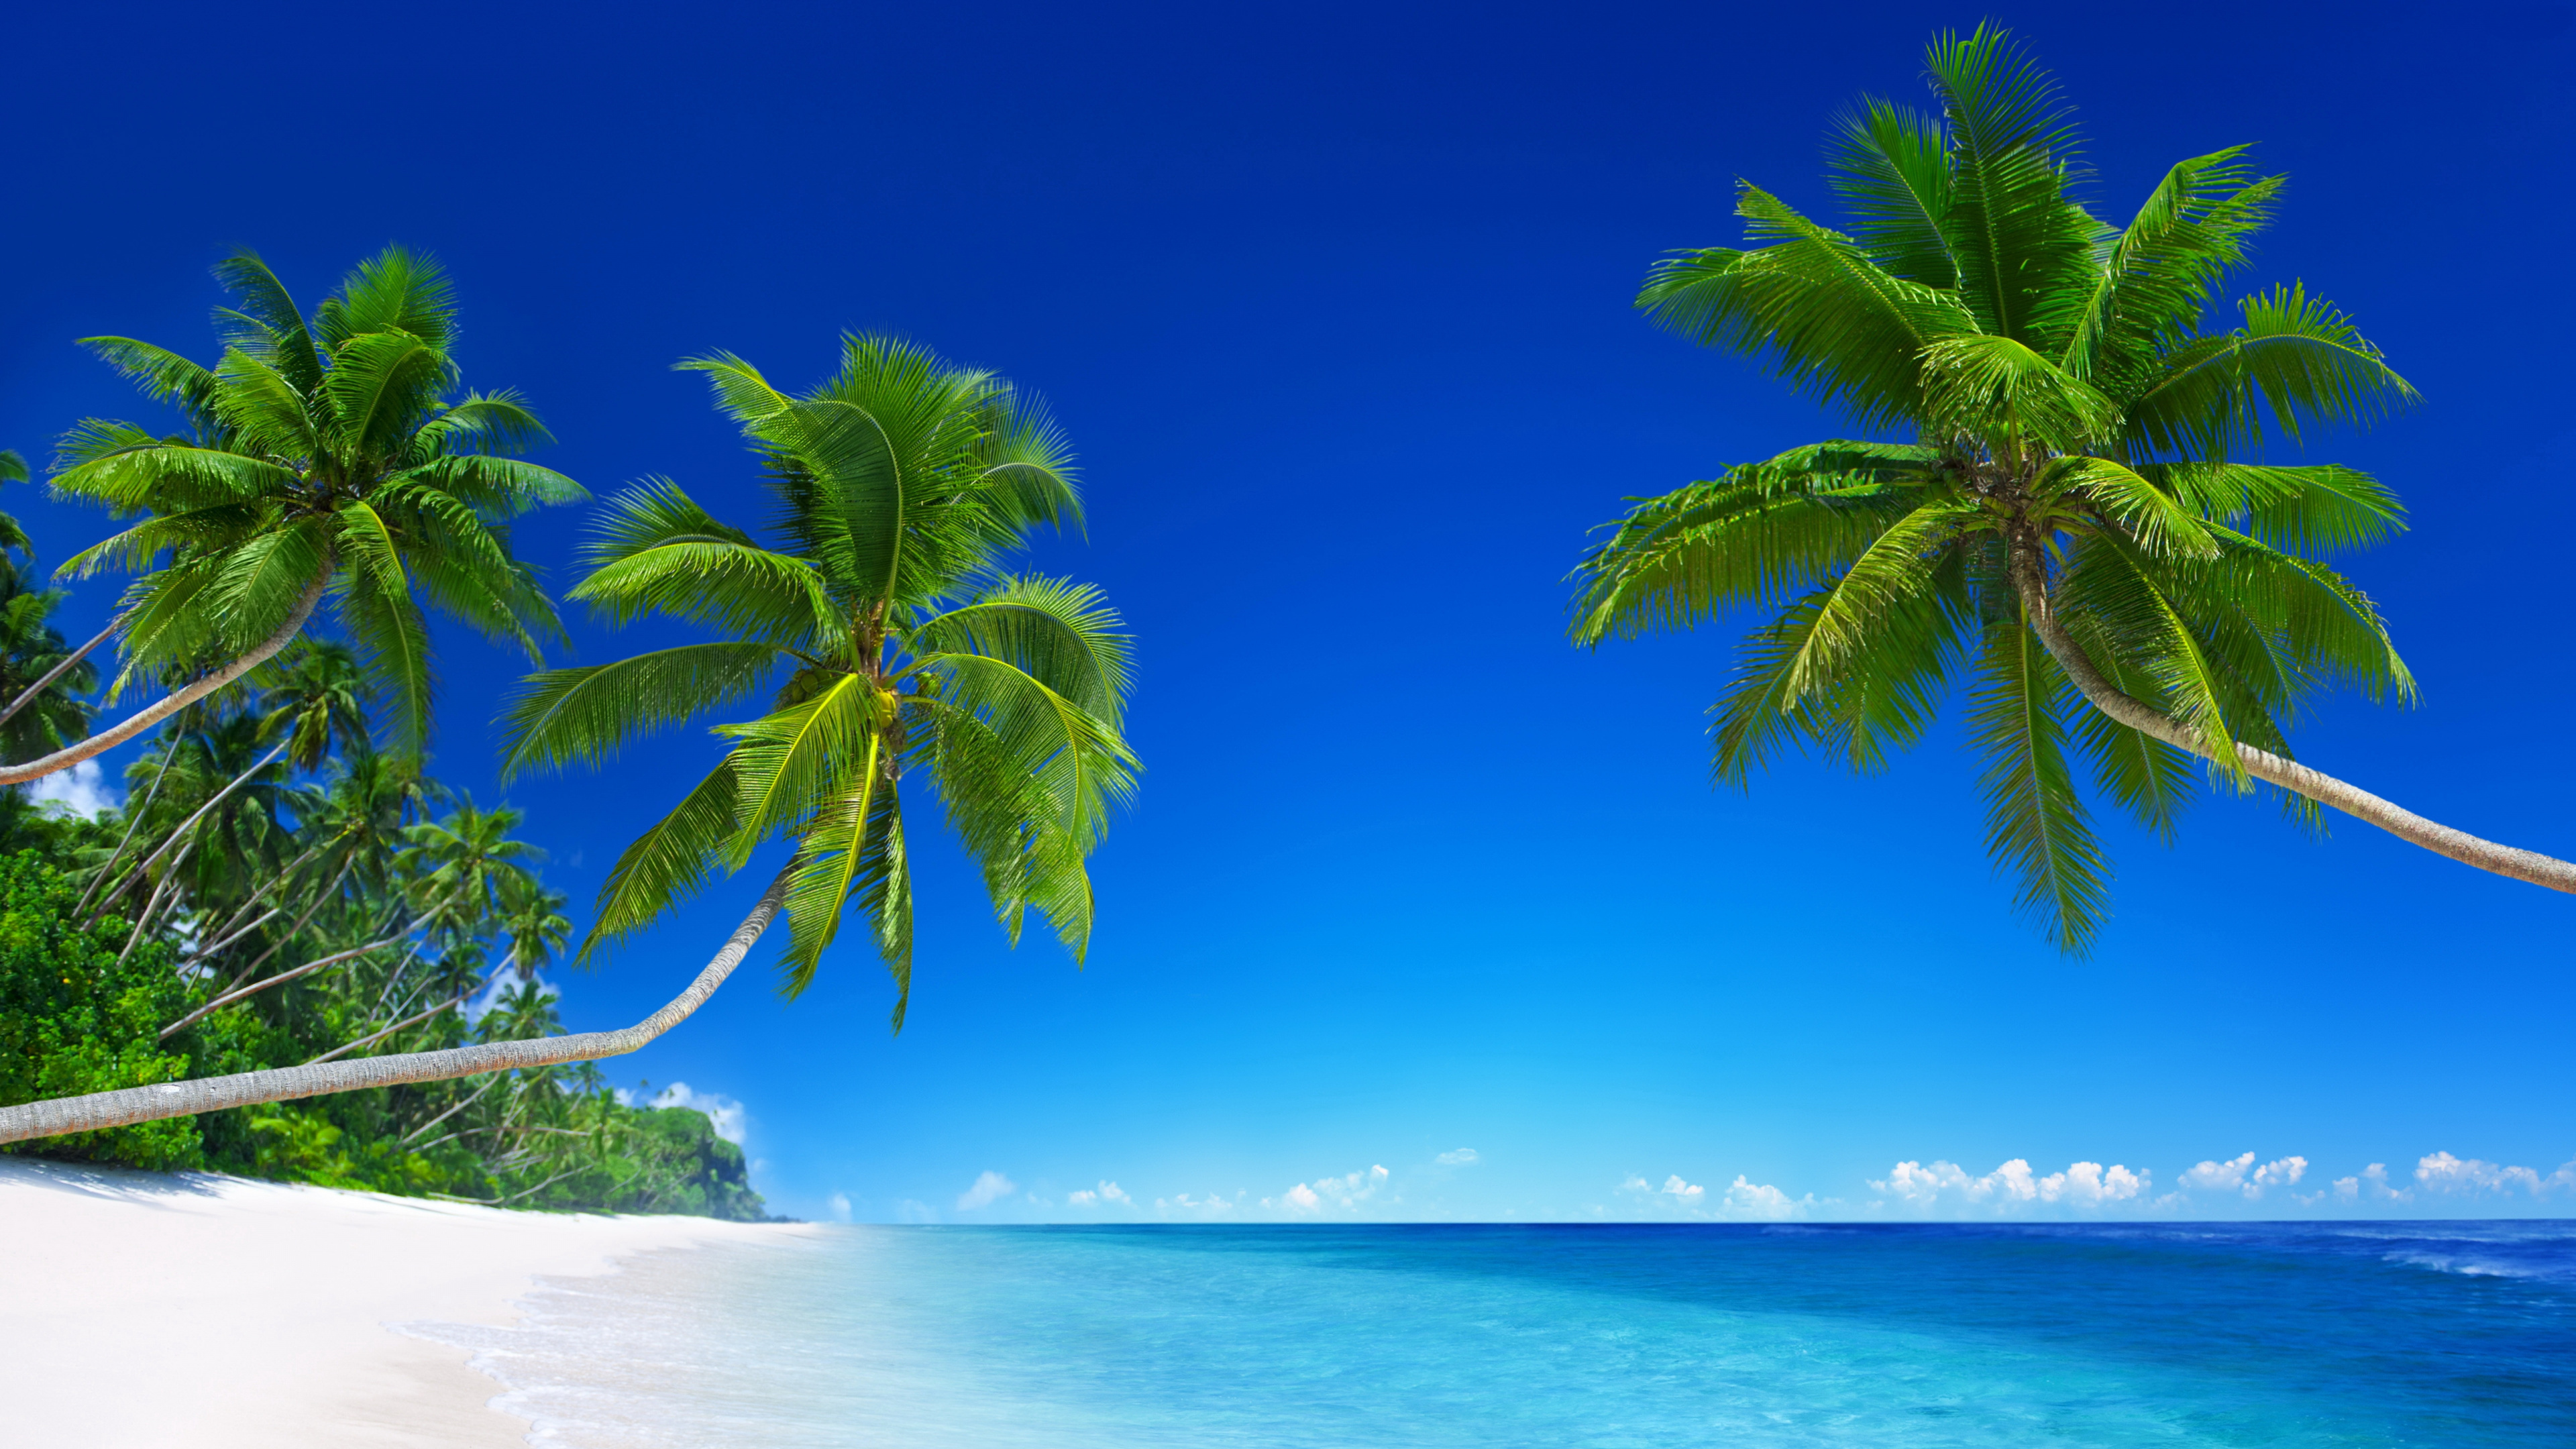 Green Palm Tree on White Sand Beach During Daytime. Wallpaper in 3840x2160 Resolution